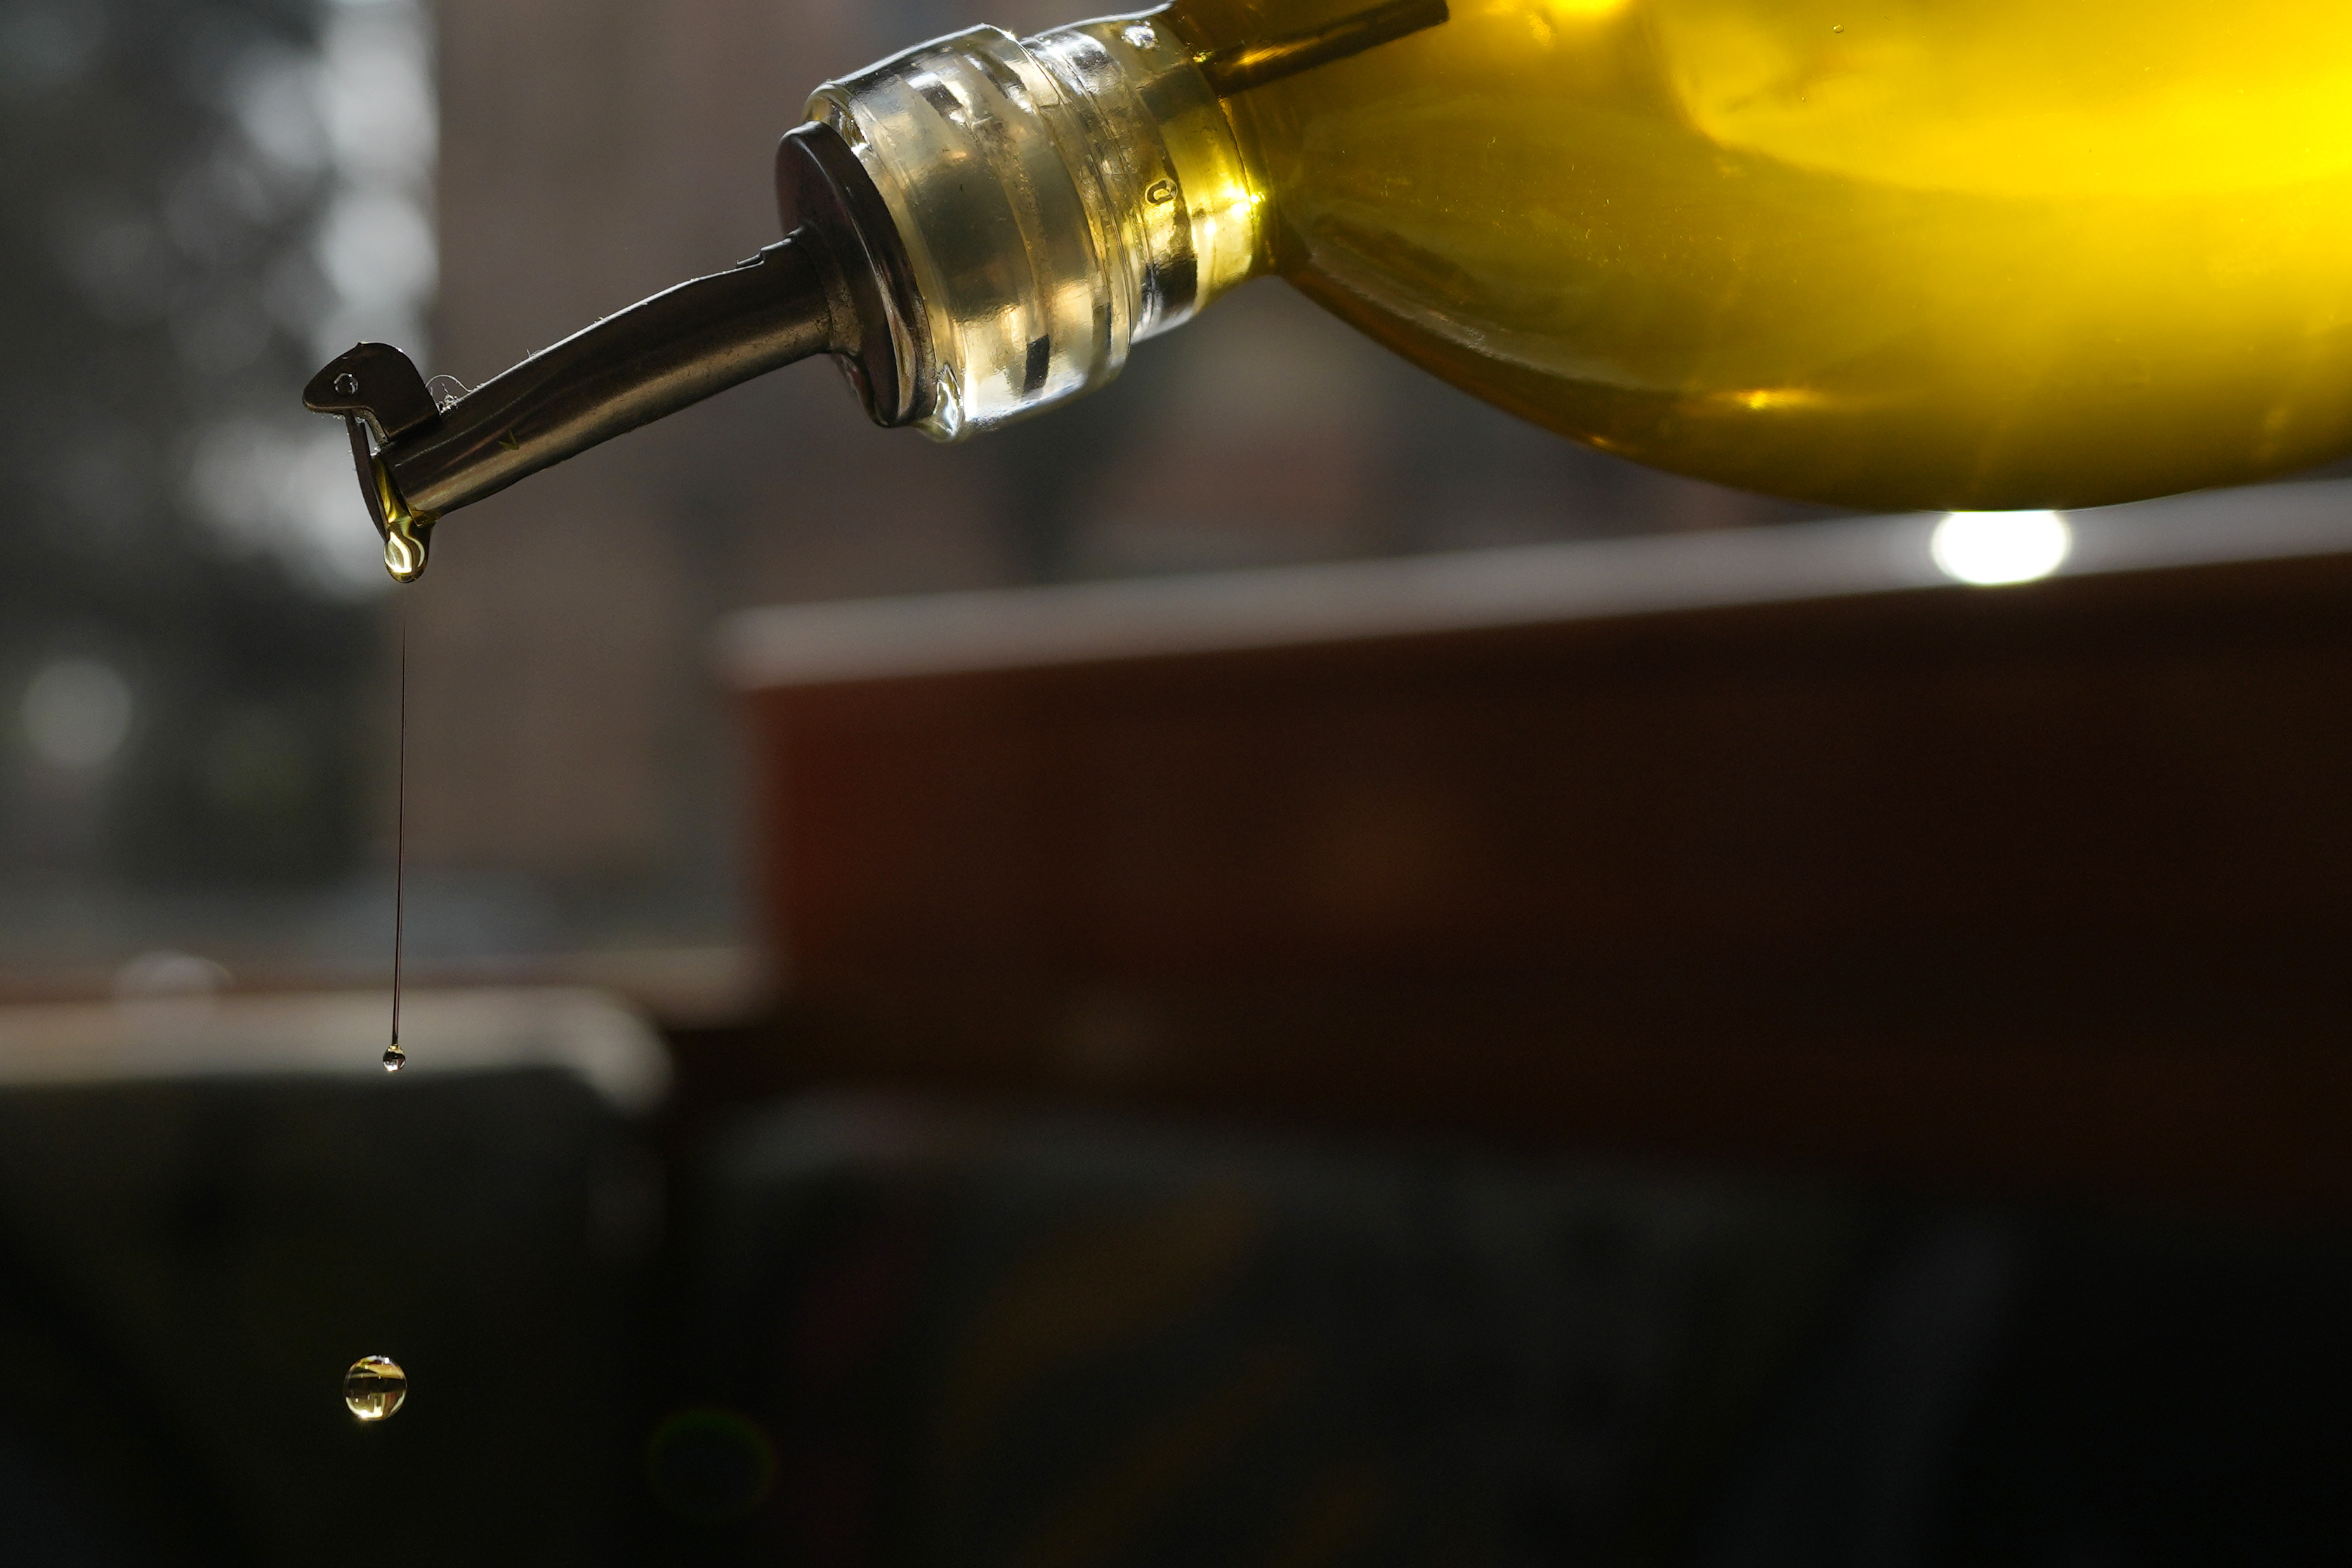 Why is olive oil so expensive now? Here’s what to know